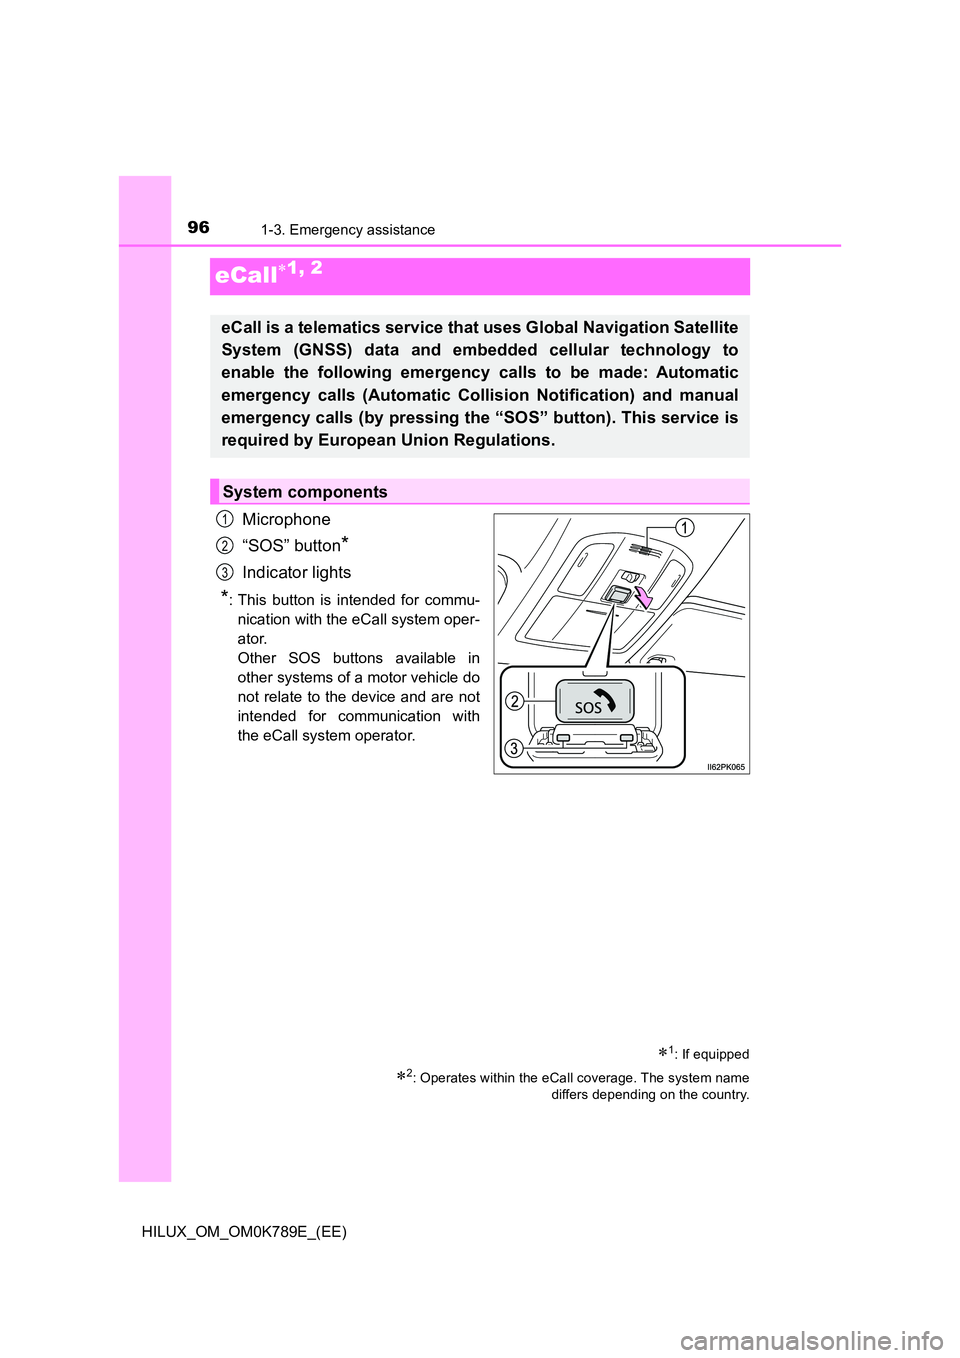 TOYOTA HILUX 2023  Owners Manual 961-3. Emergency assistance
HILUX_OM_OM0K789E_(EE)
eCall1, 2
Microphone 
“SOS” button*
Indicator lights
*: This button is intended for commu- 
nication with the eCall system oper-
ator.
Other S